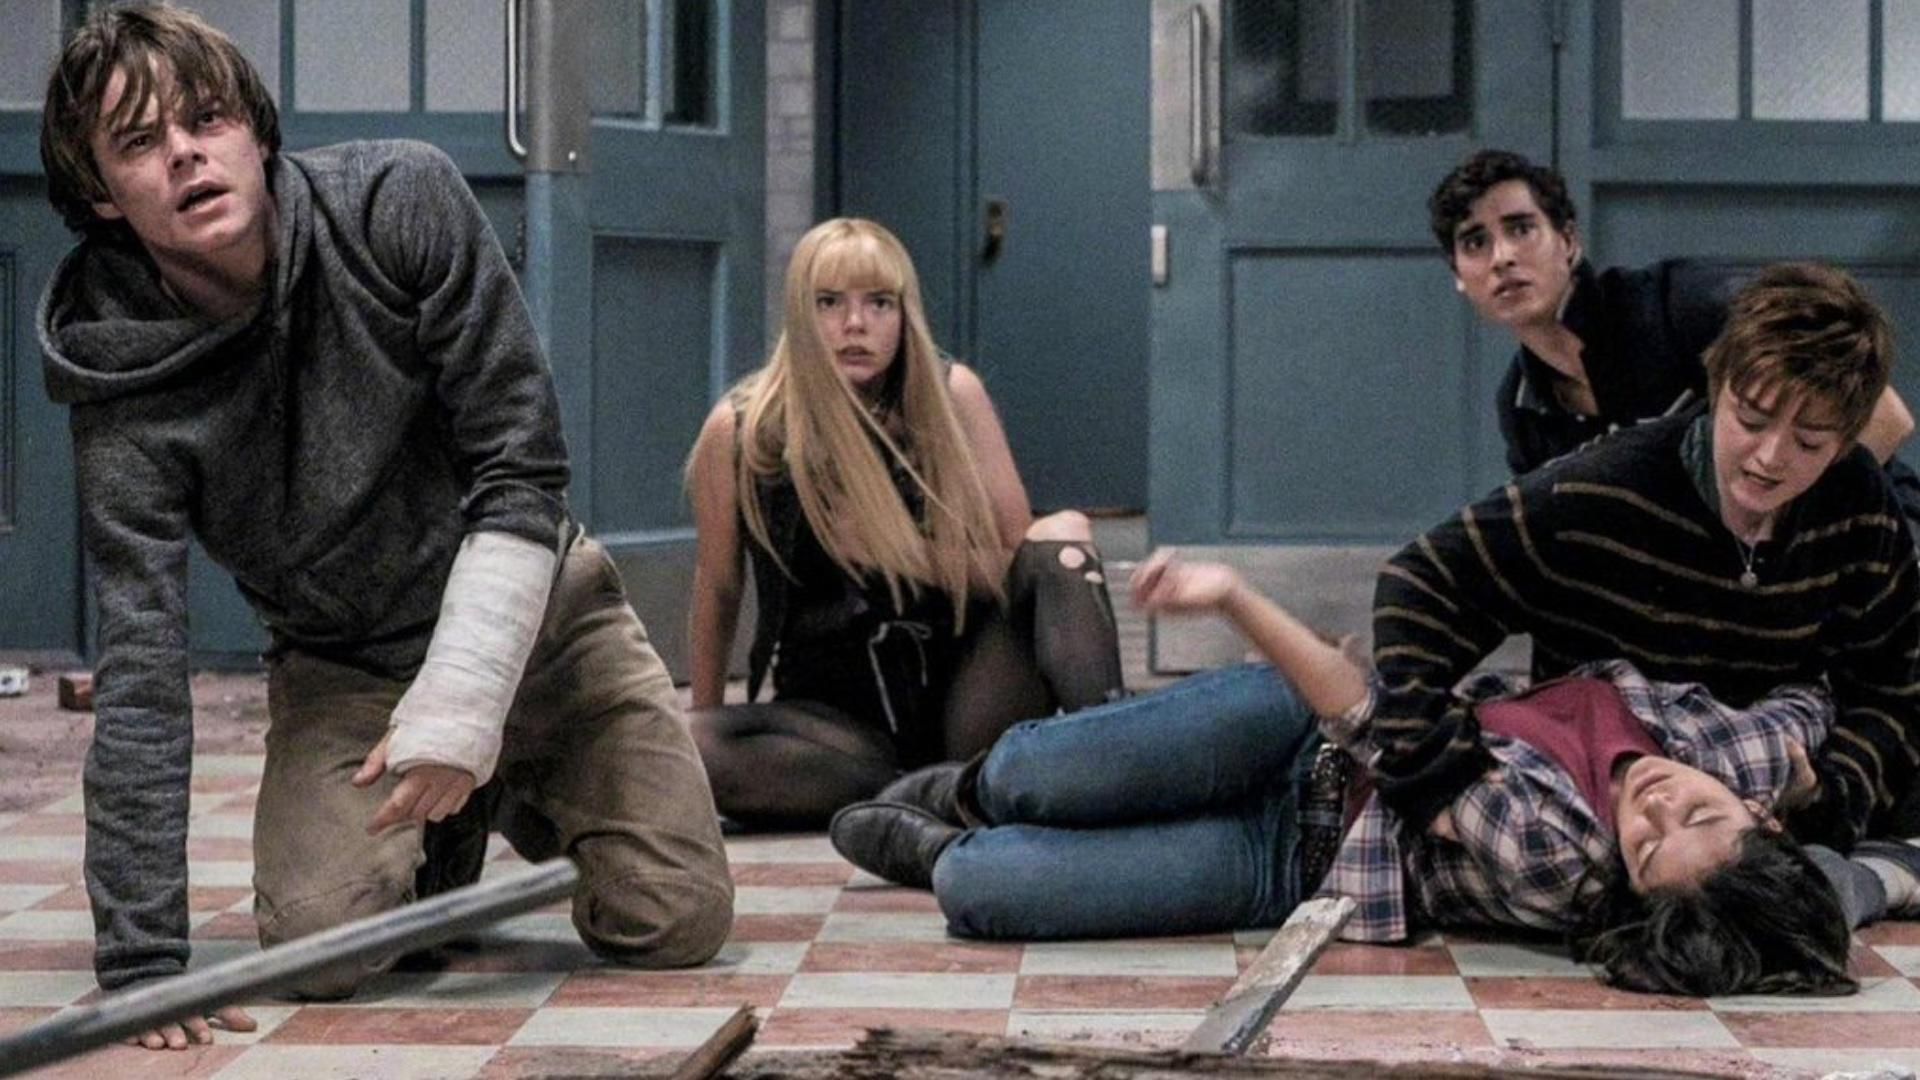 SDCC 2020: Marvel's The New Mutants opening scene shows